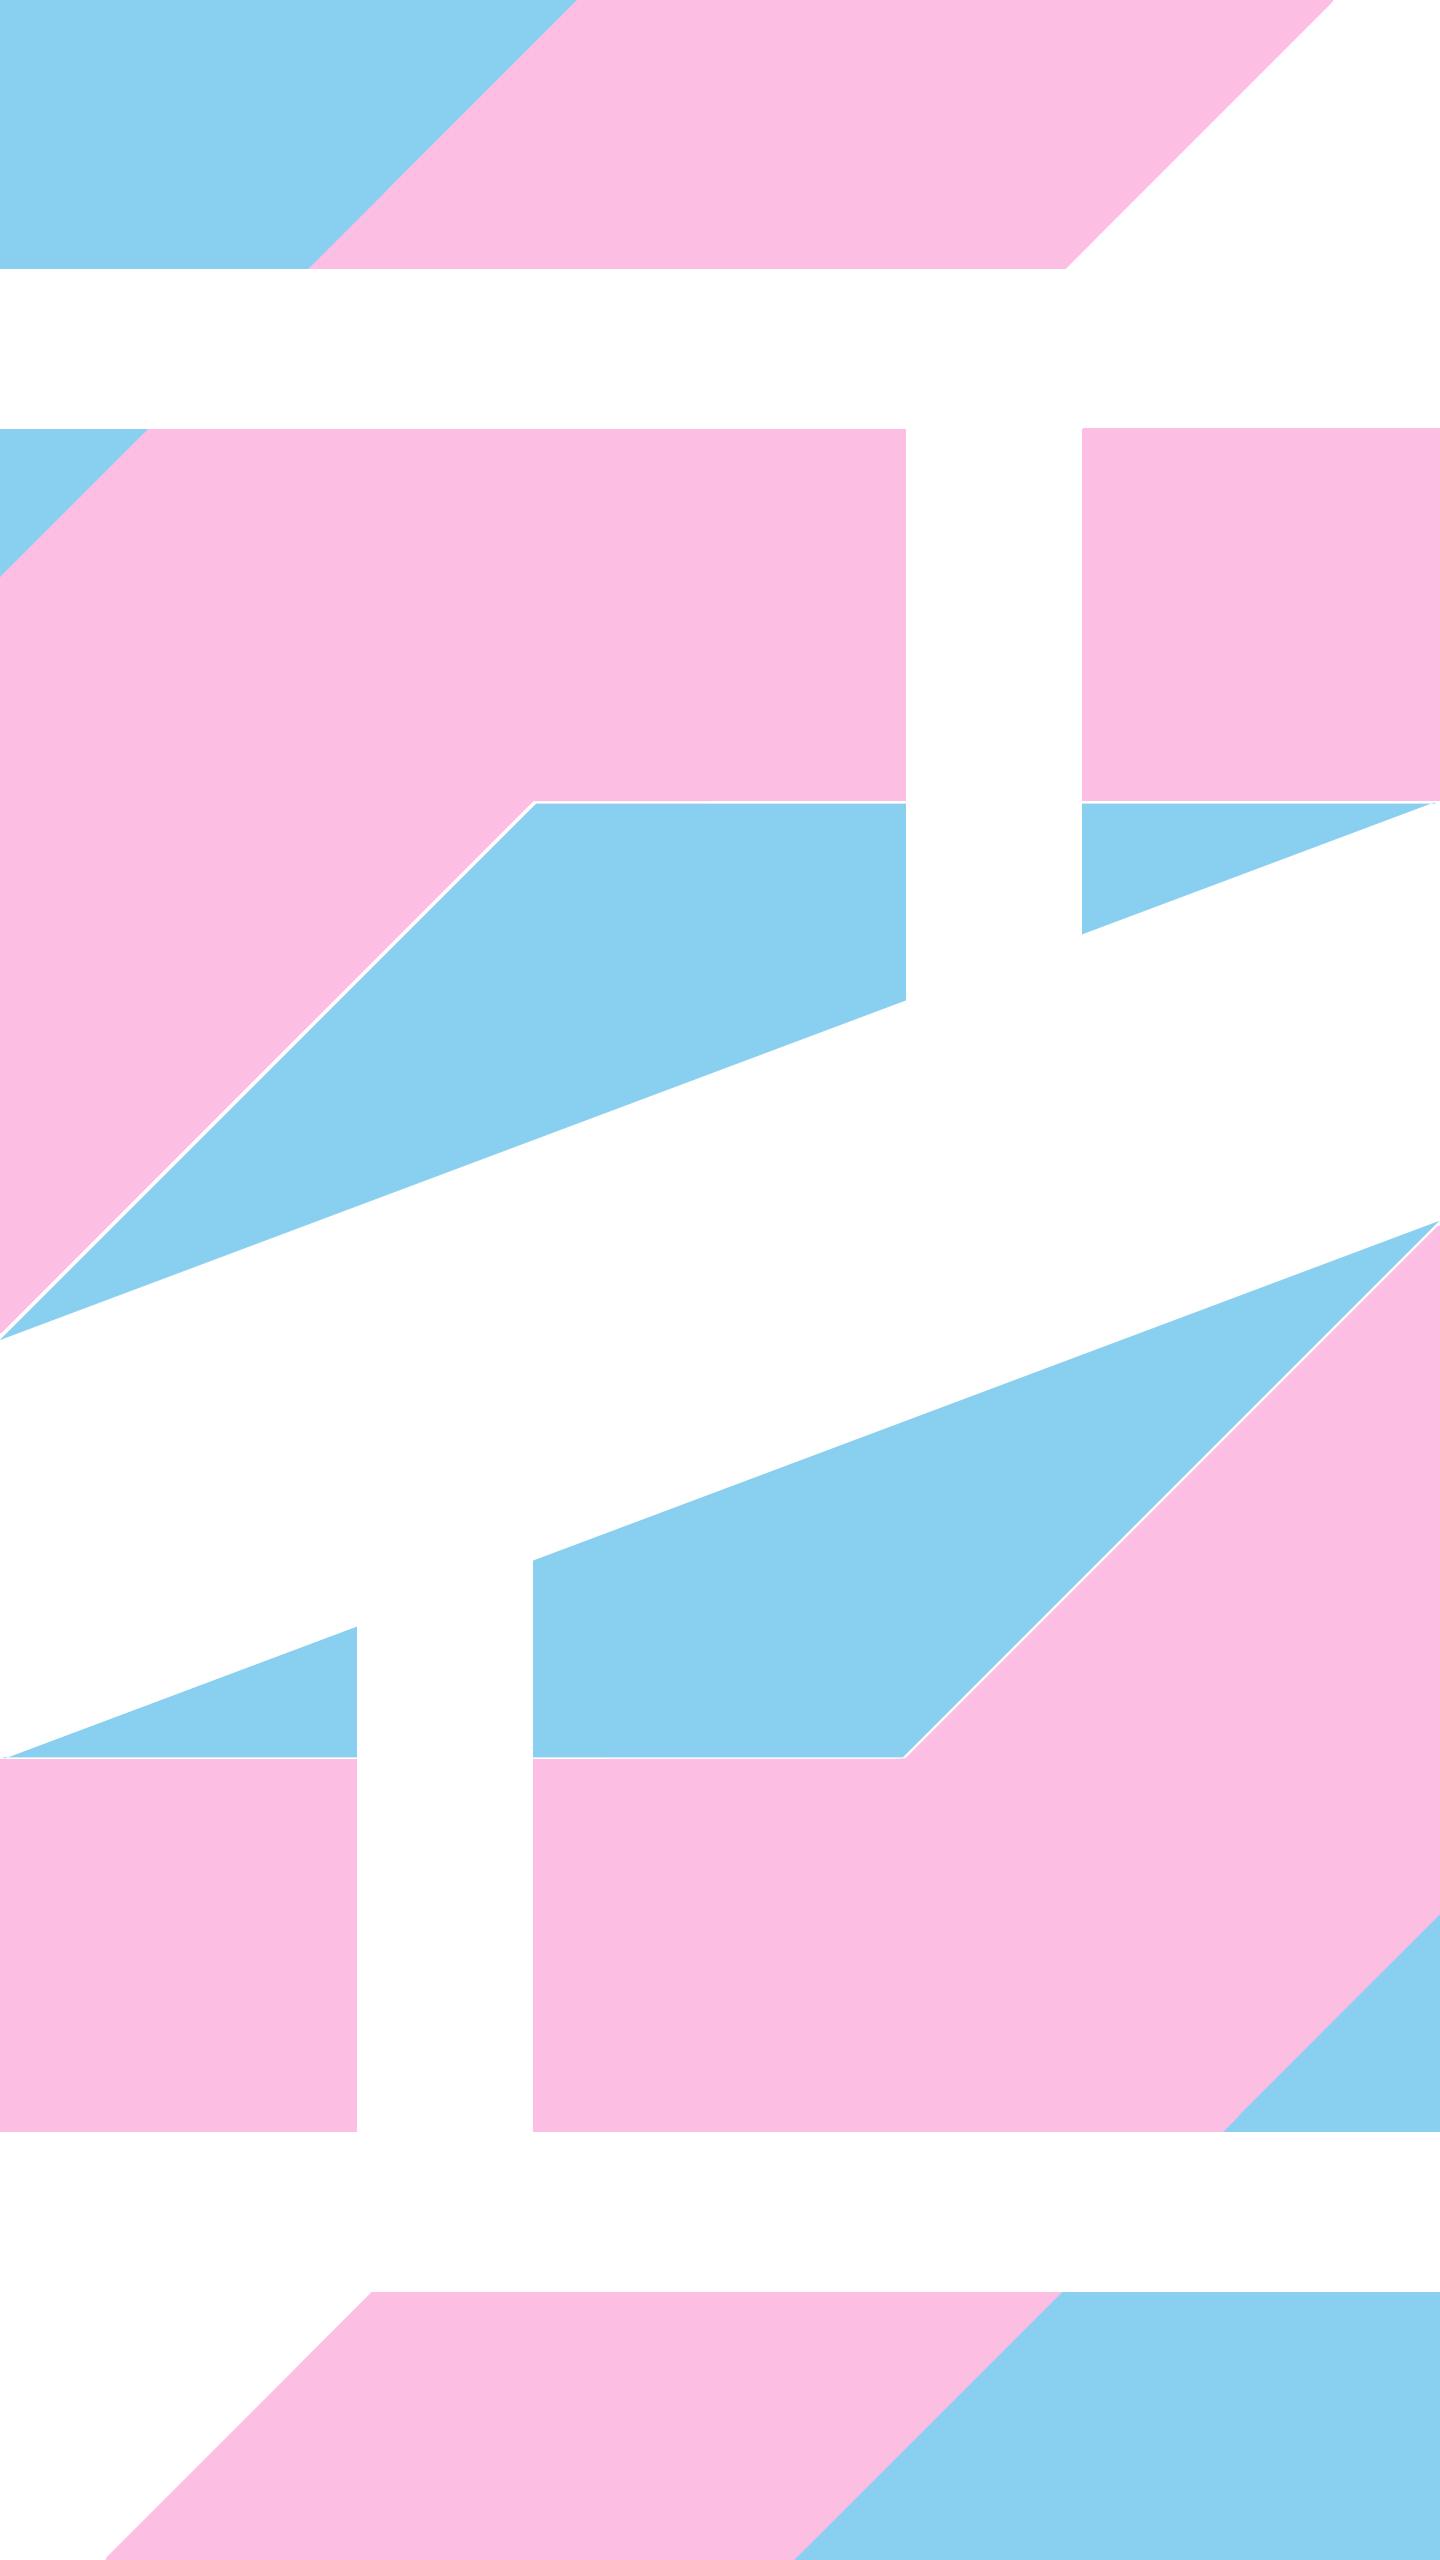 A simple geometric mobile wallpaper I made for girls, enbies